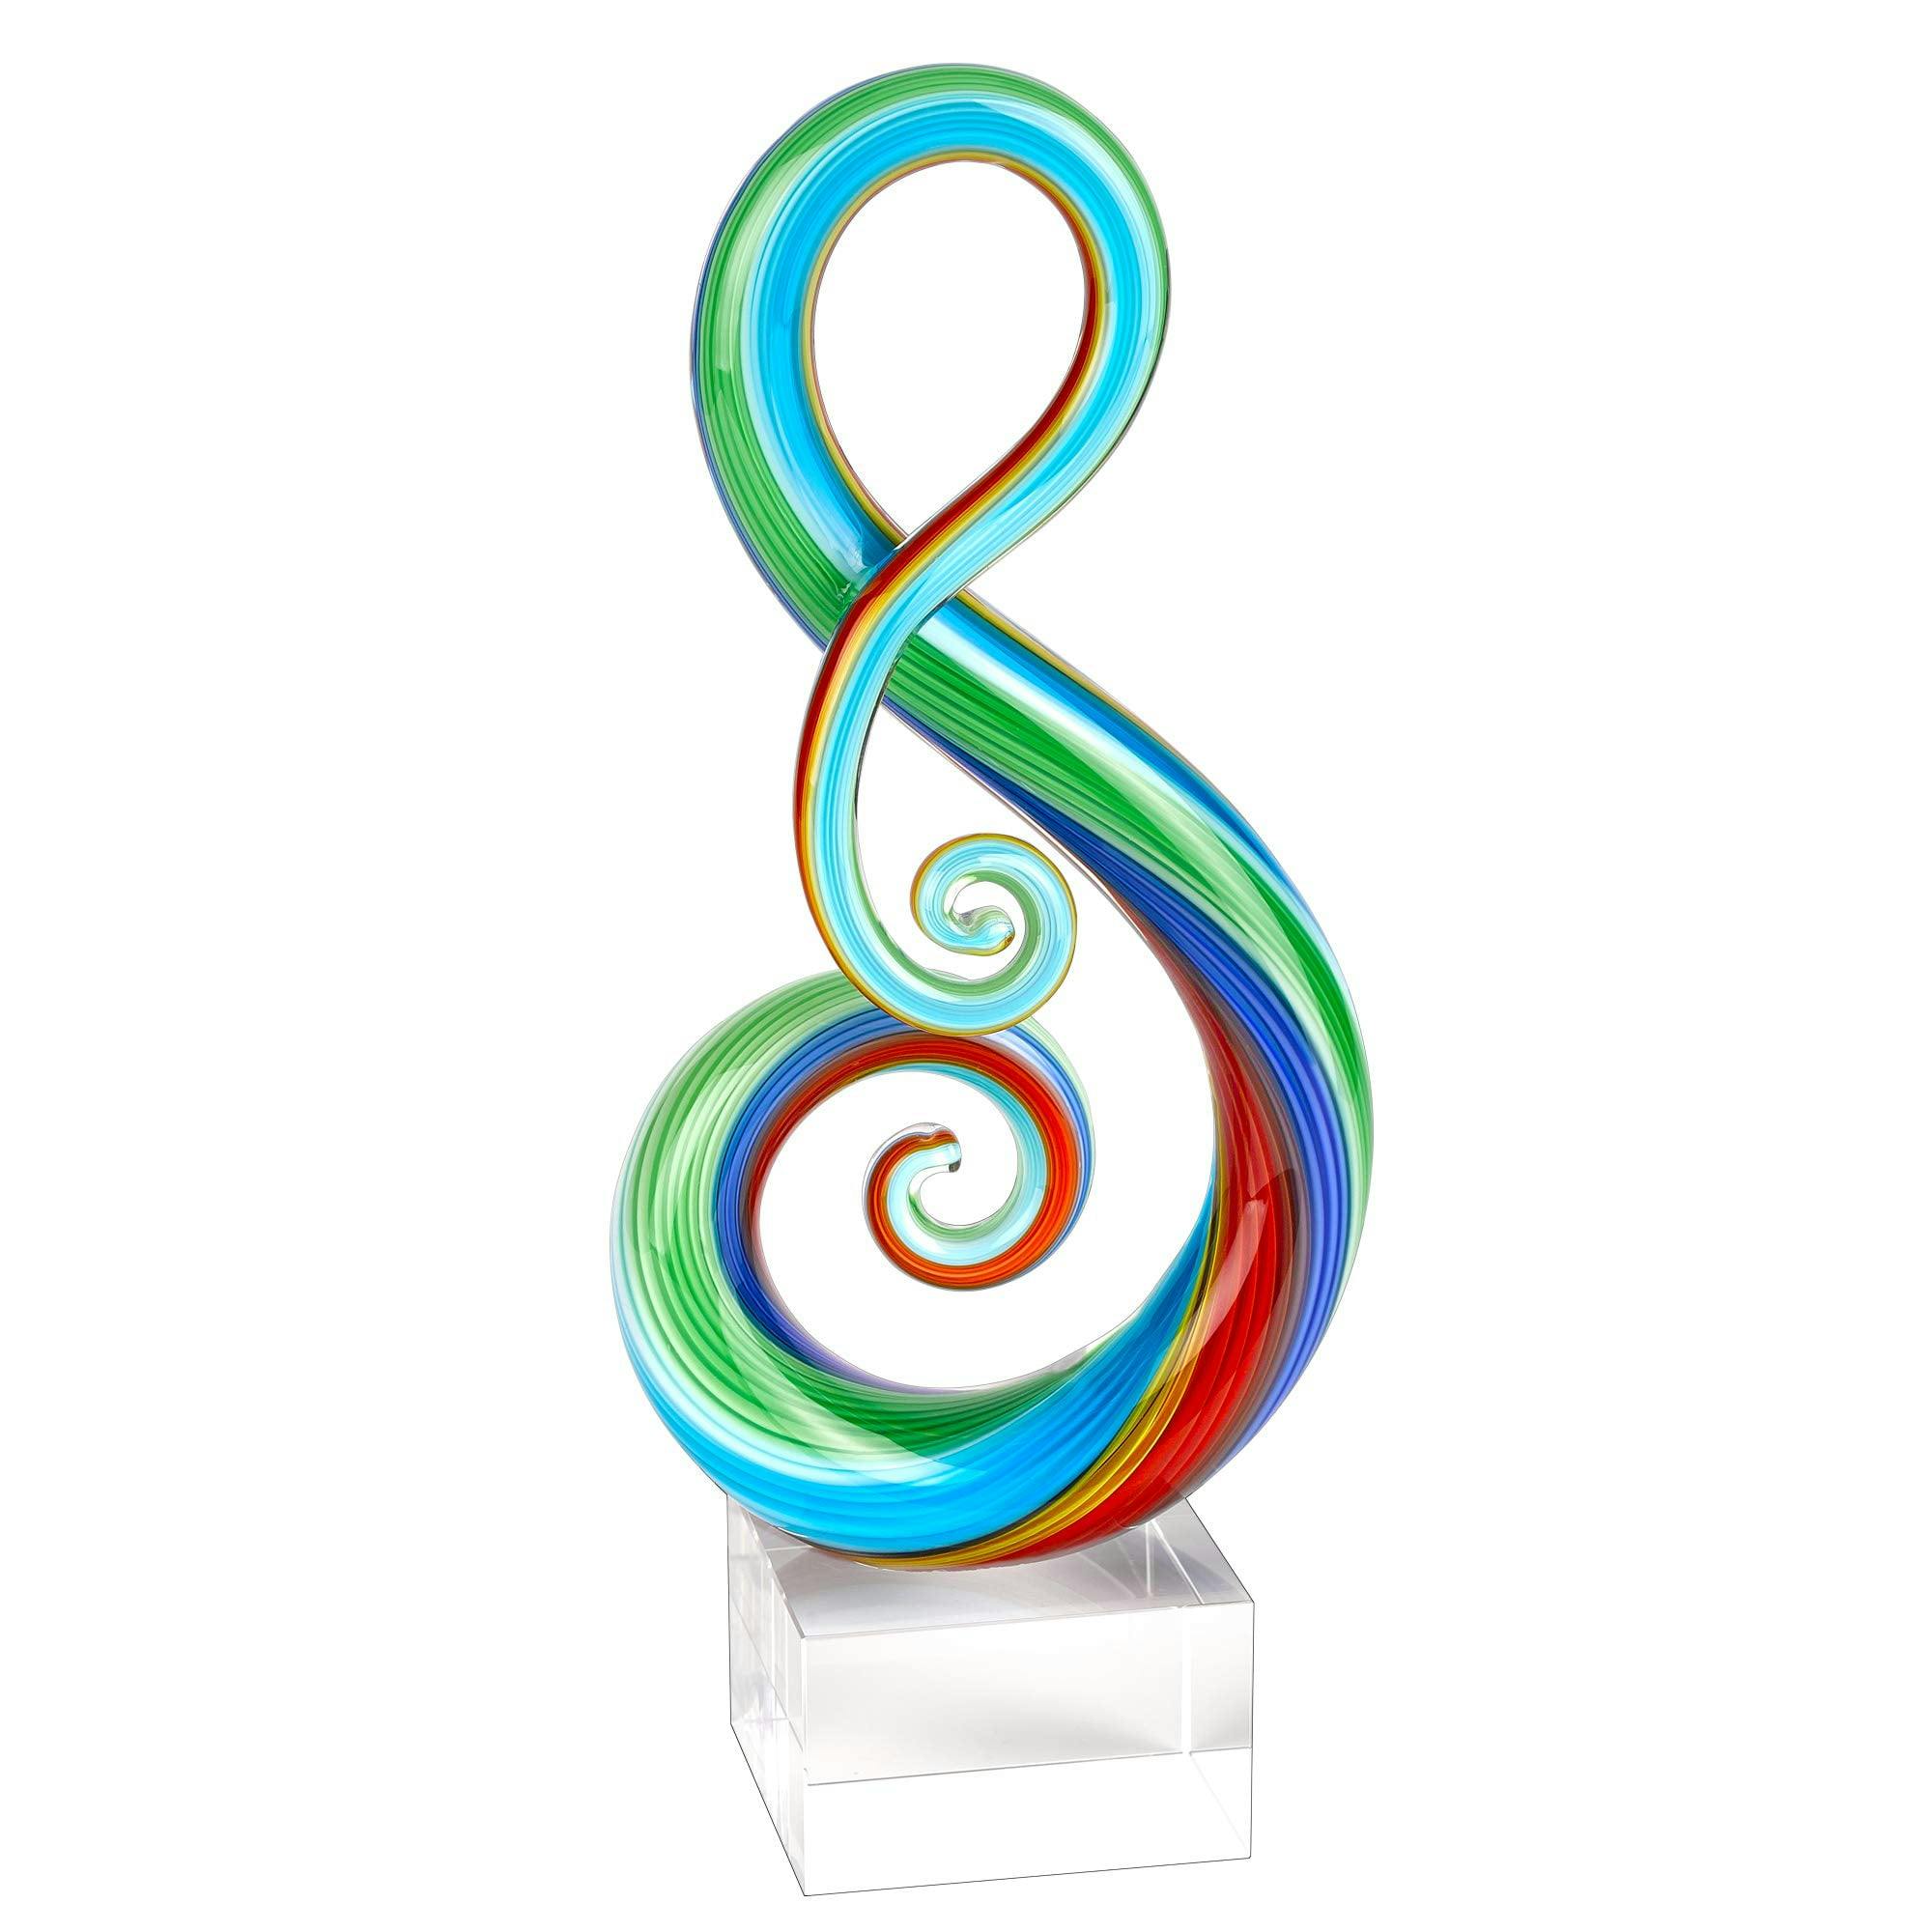 Rainbow Note 11" Handcrafted Murano-Style Glass Sculpture on Crystal Base